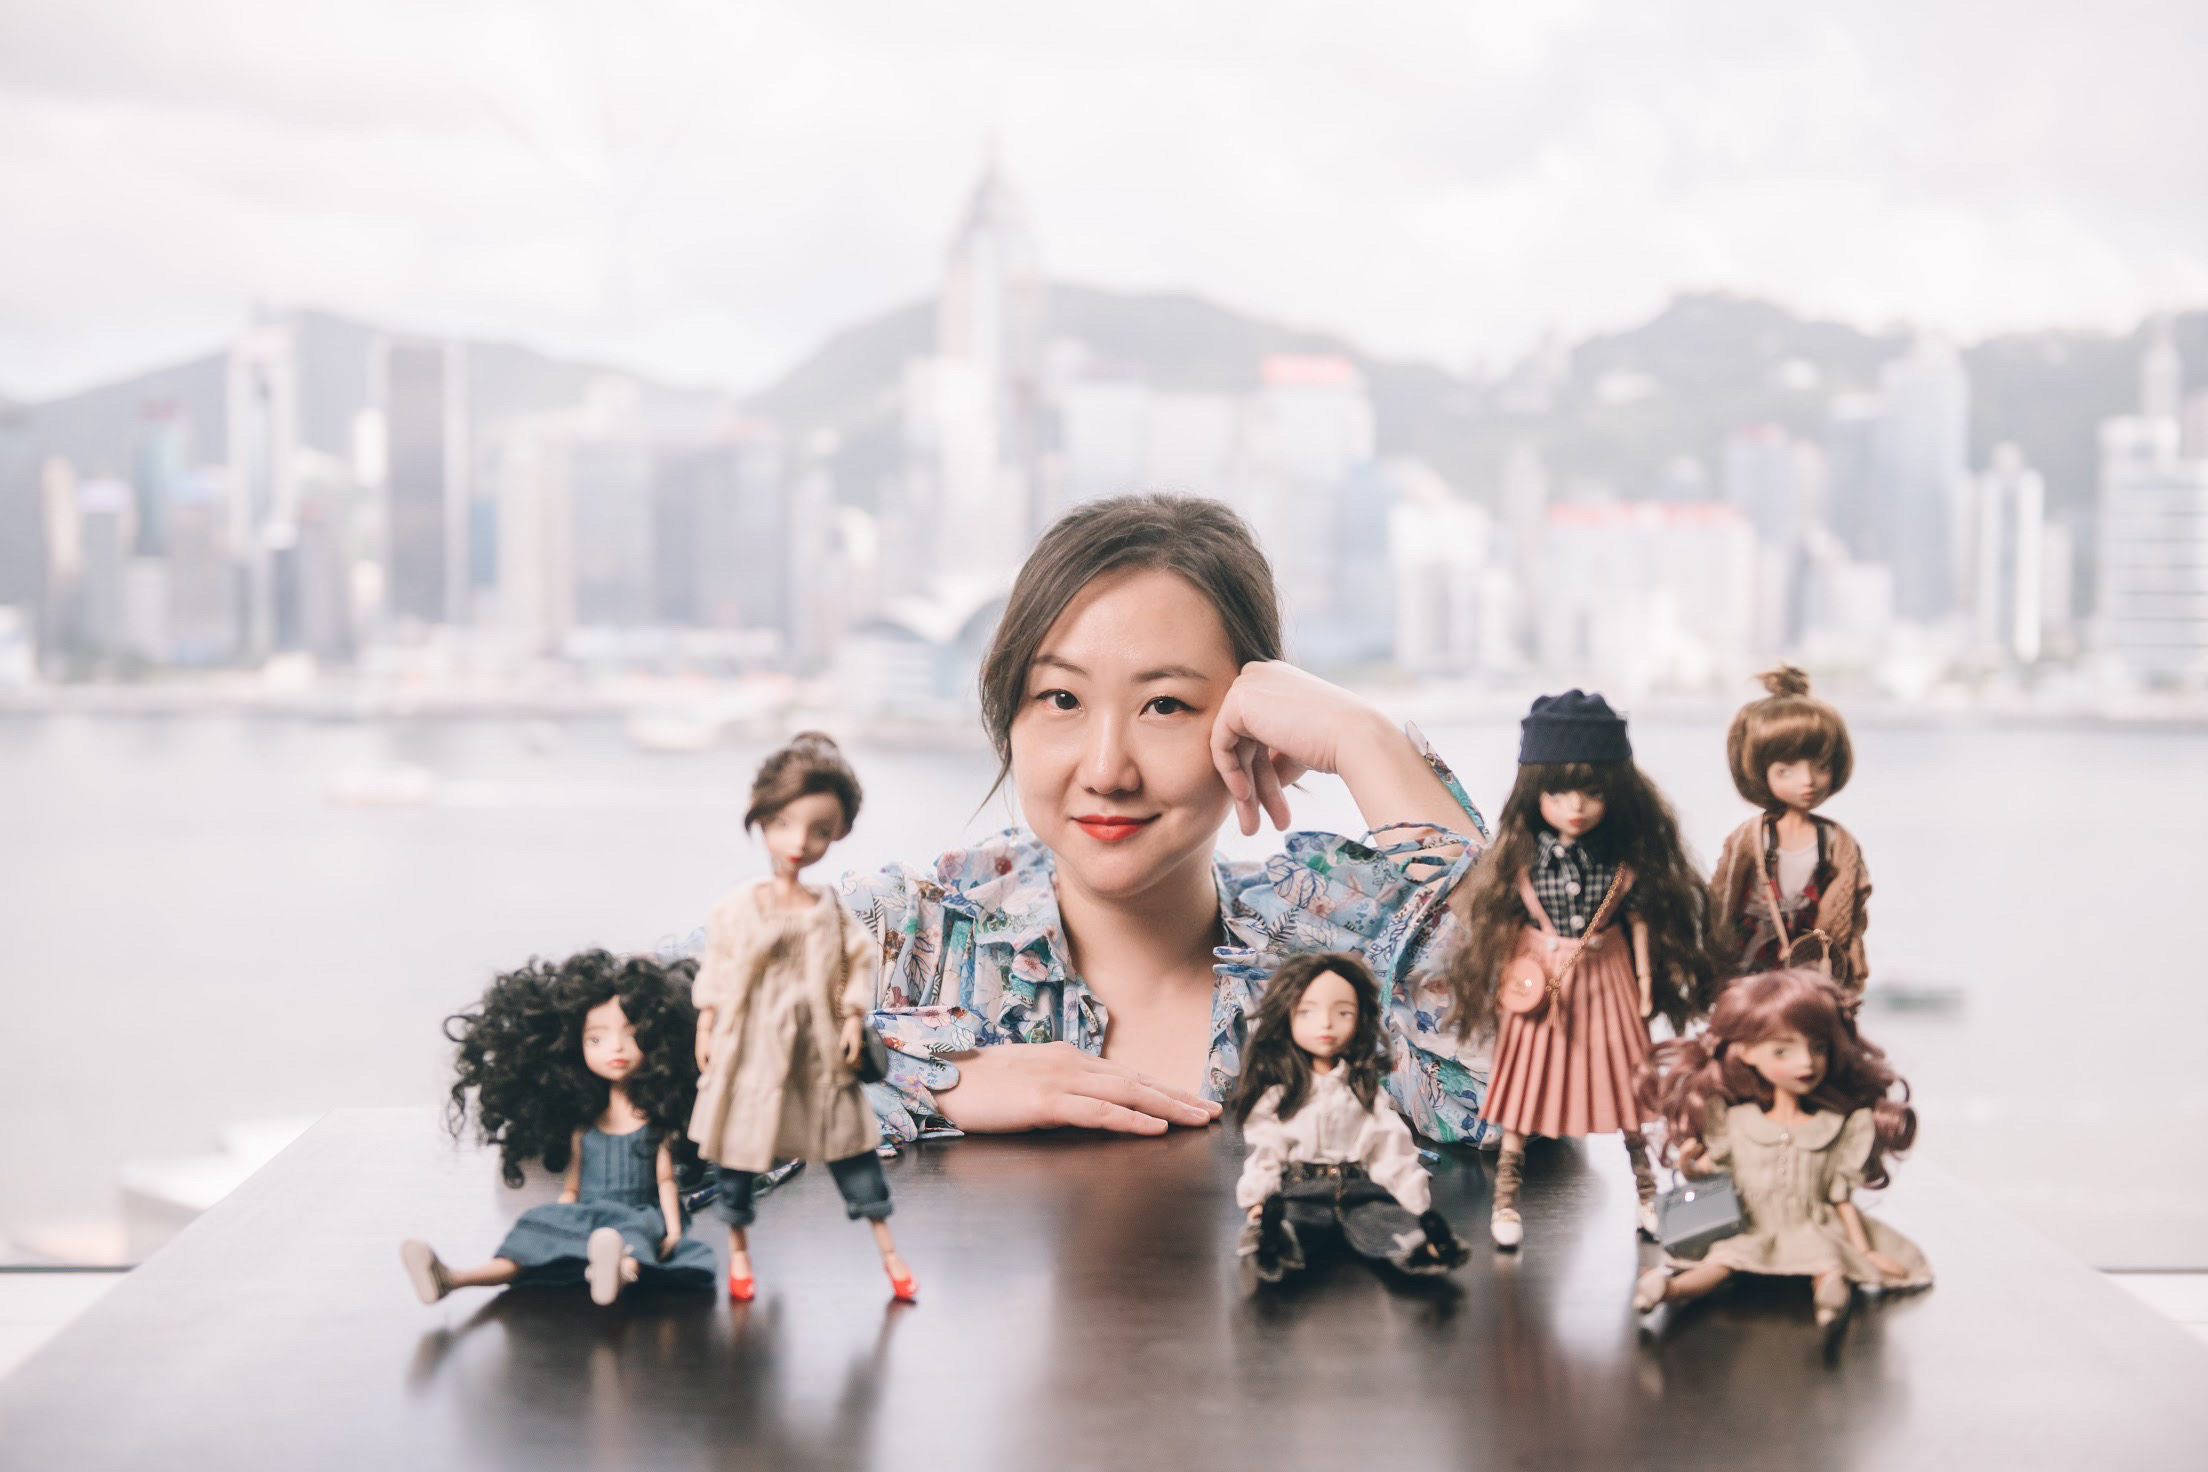 Hong Kong's Ning Lau makes Barbie-like dolls that wear Chanel, Hermès – a  far cry from the paper dolls she made when she was poor